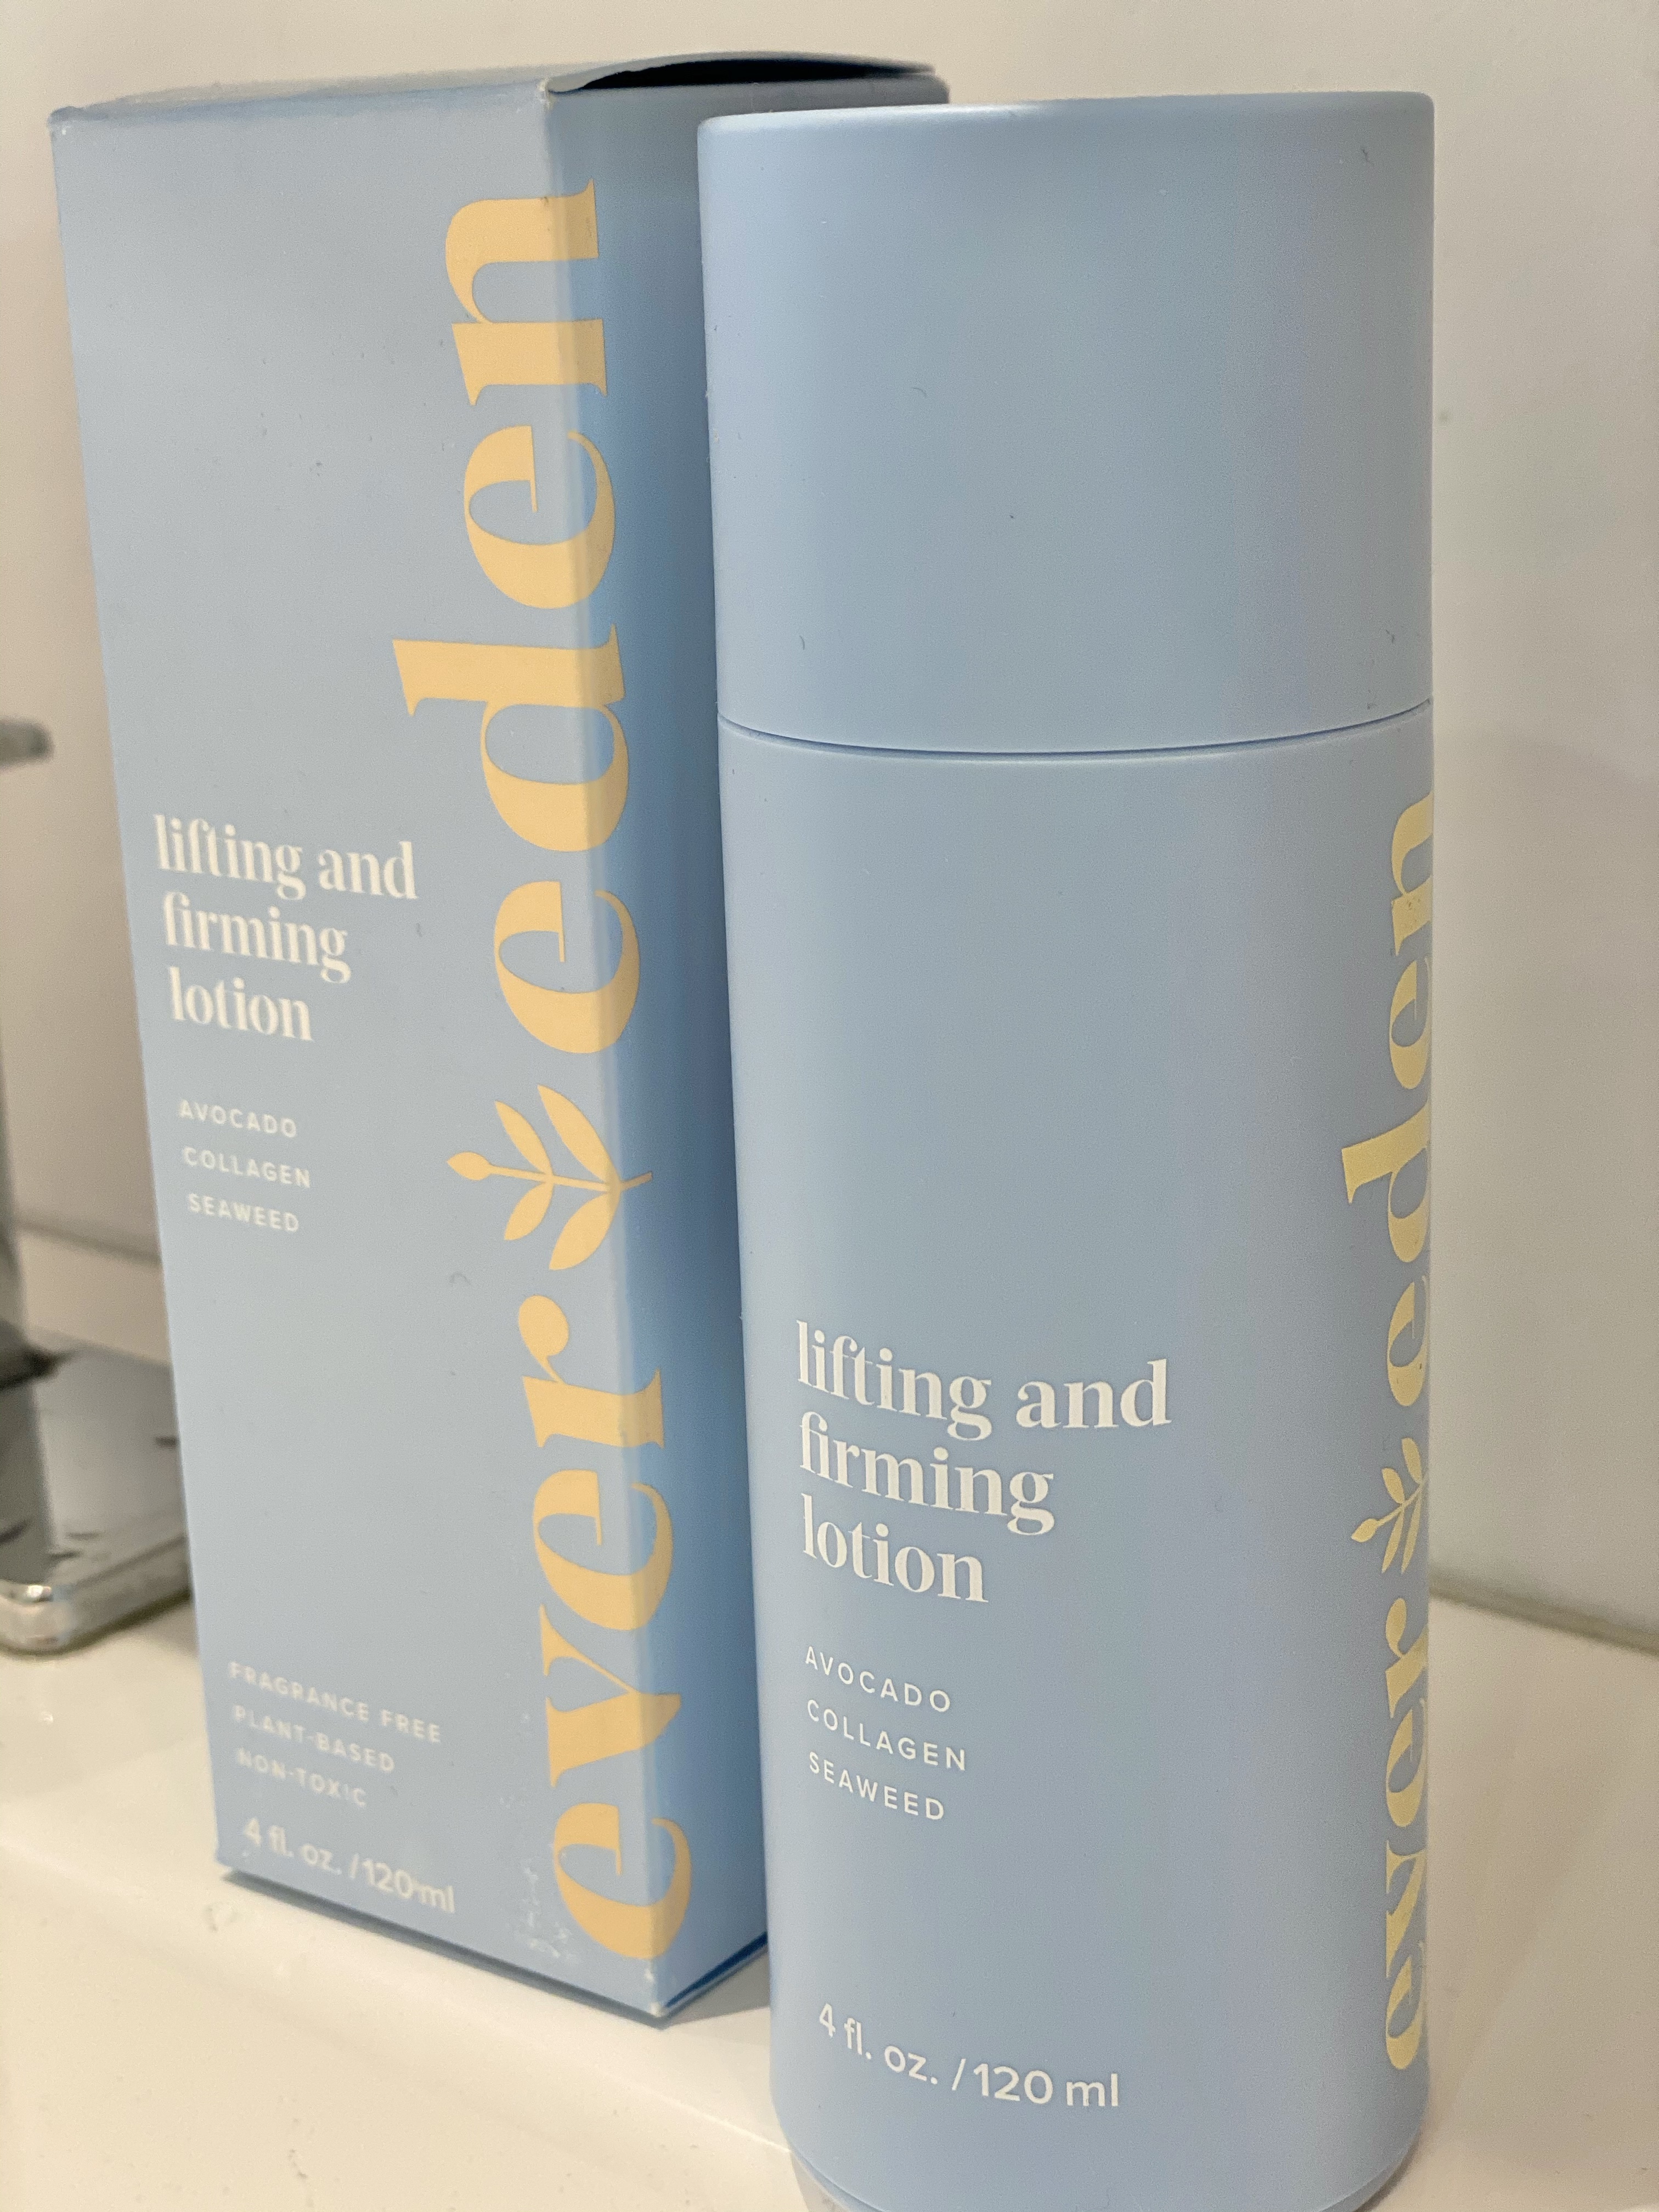 Lifting and firming lotion